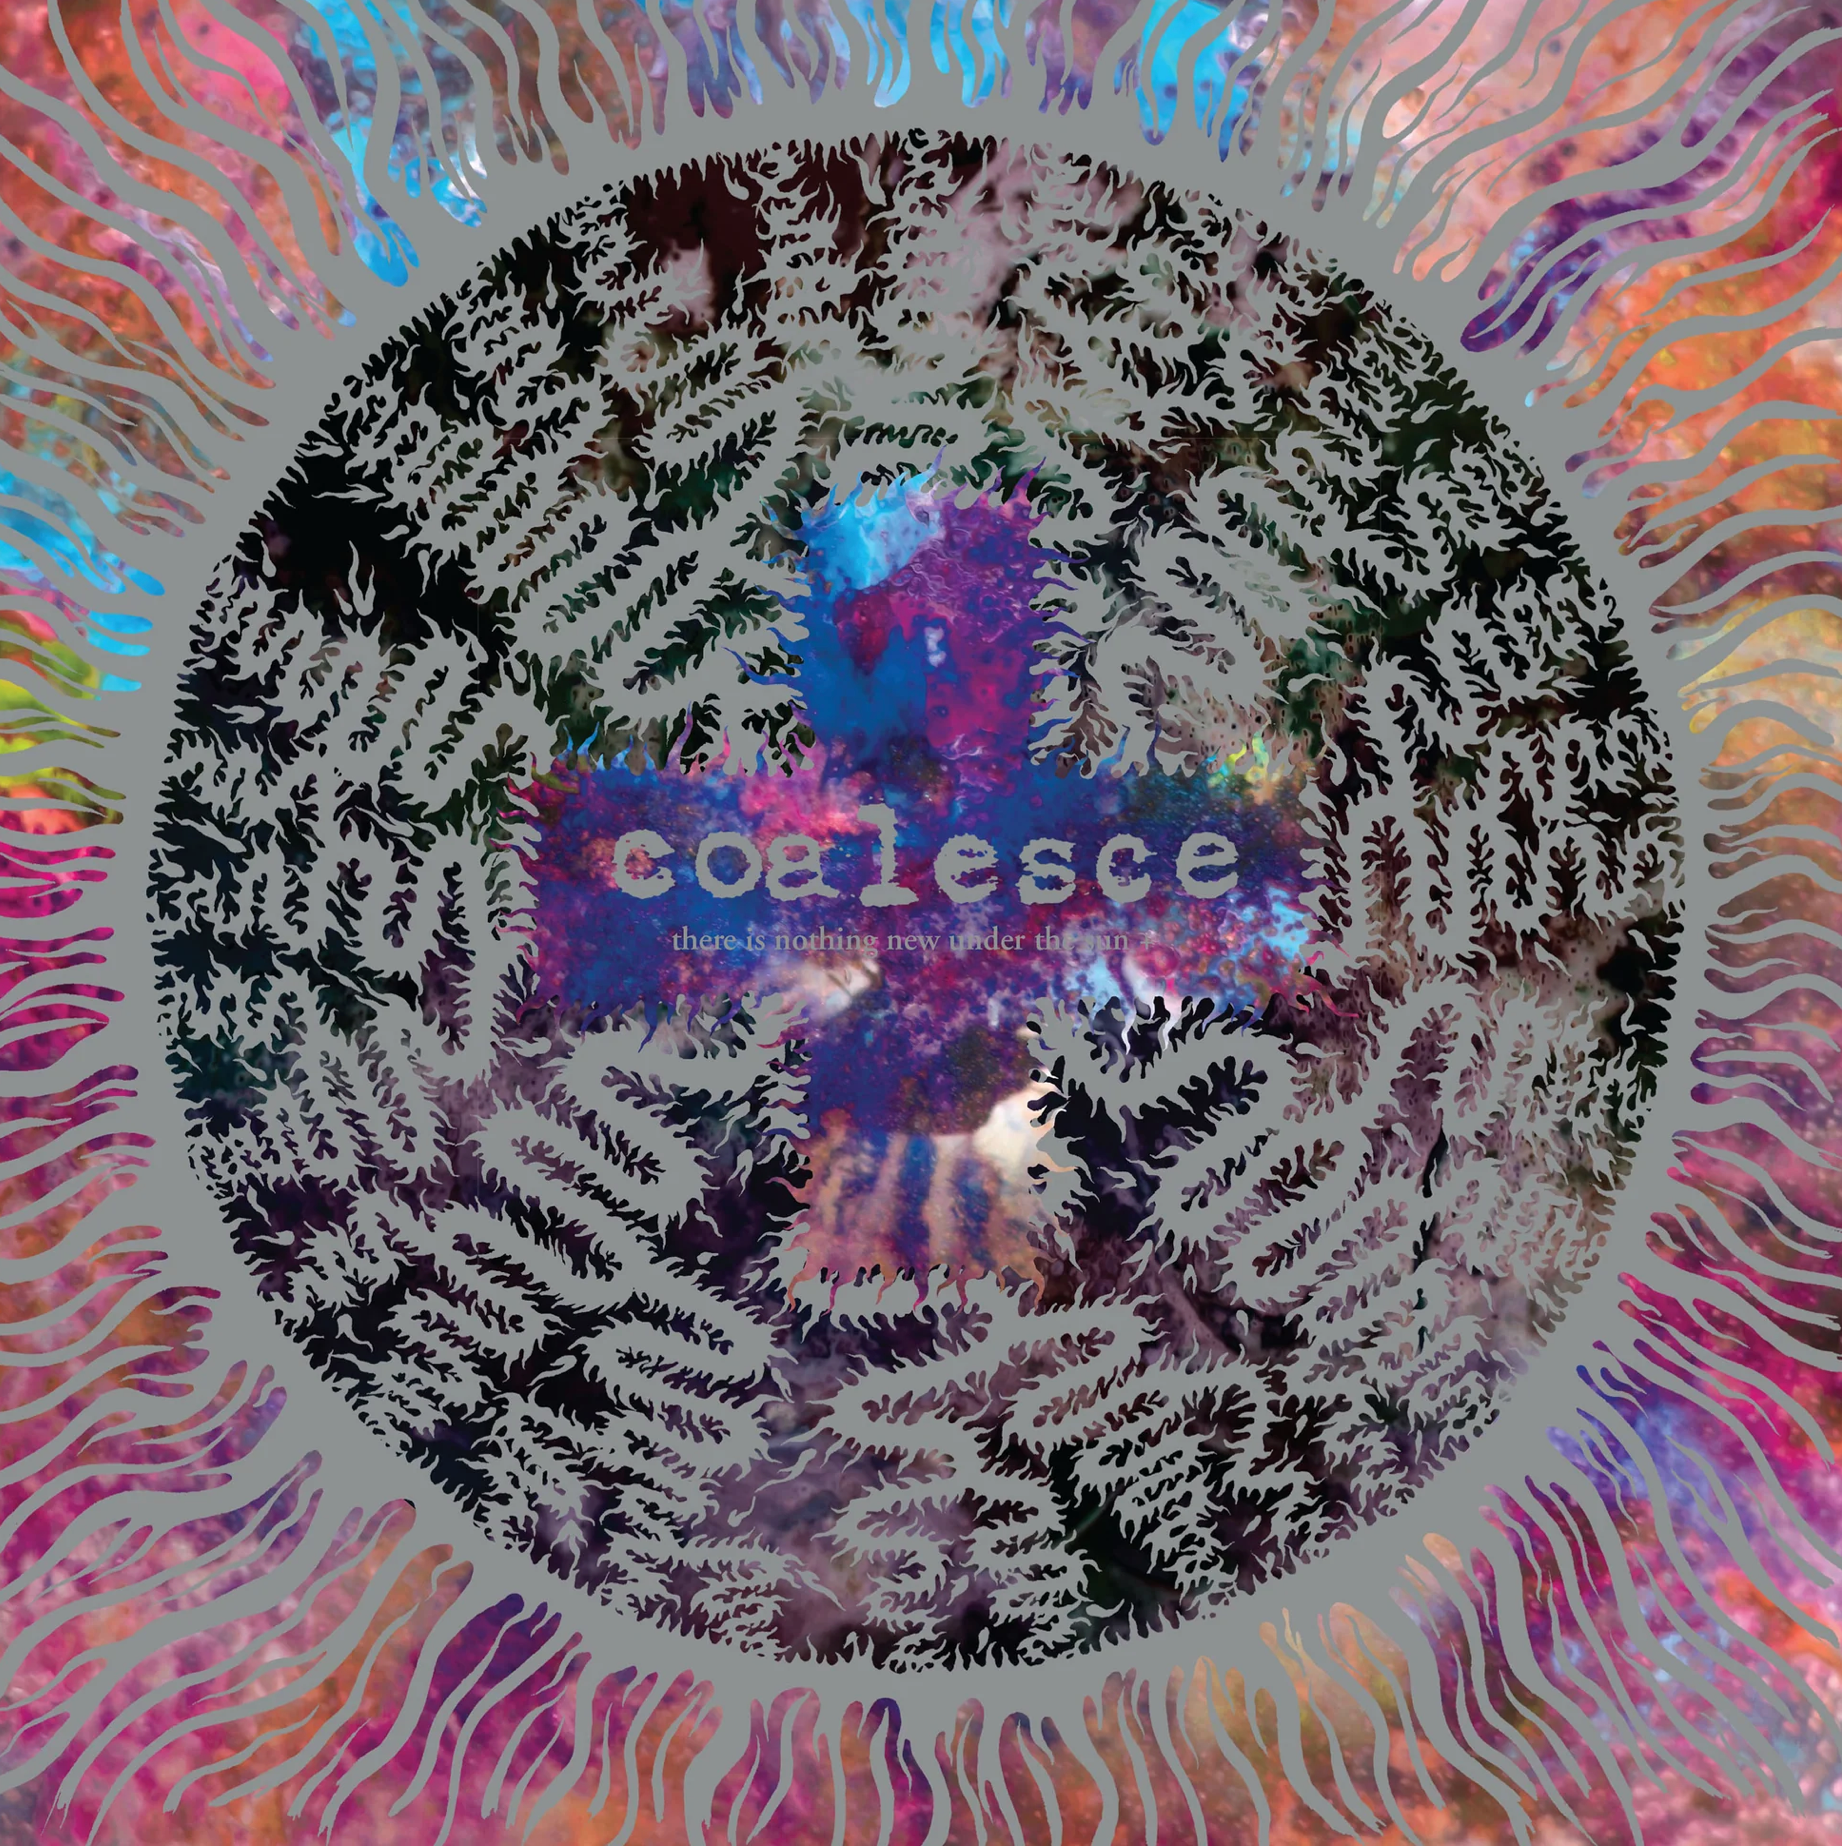 COALESCE - THERE IS NOTHING NEW UNDER THE SUN Vinyl LP